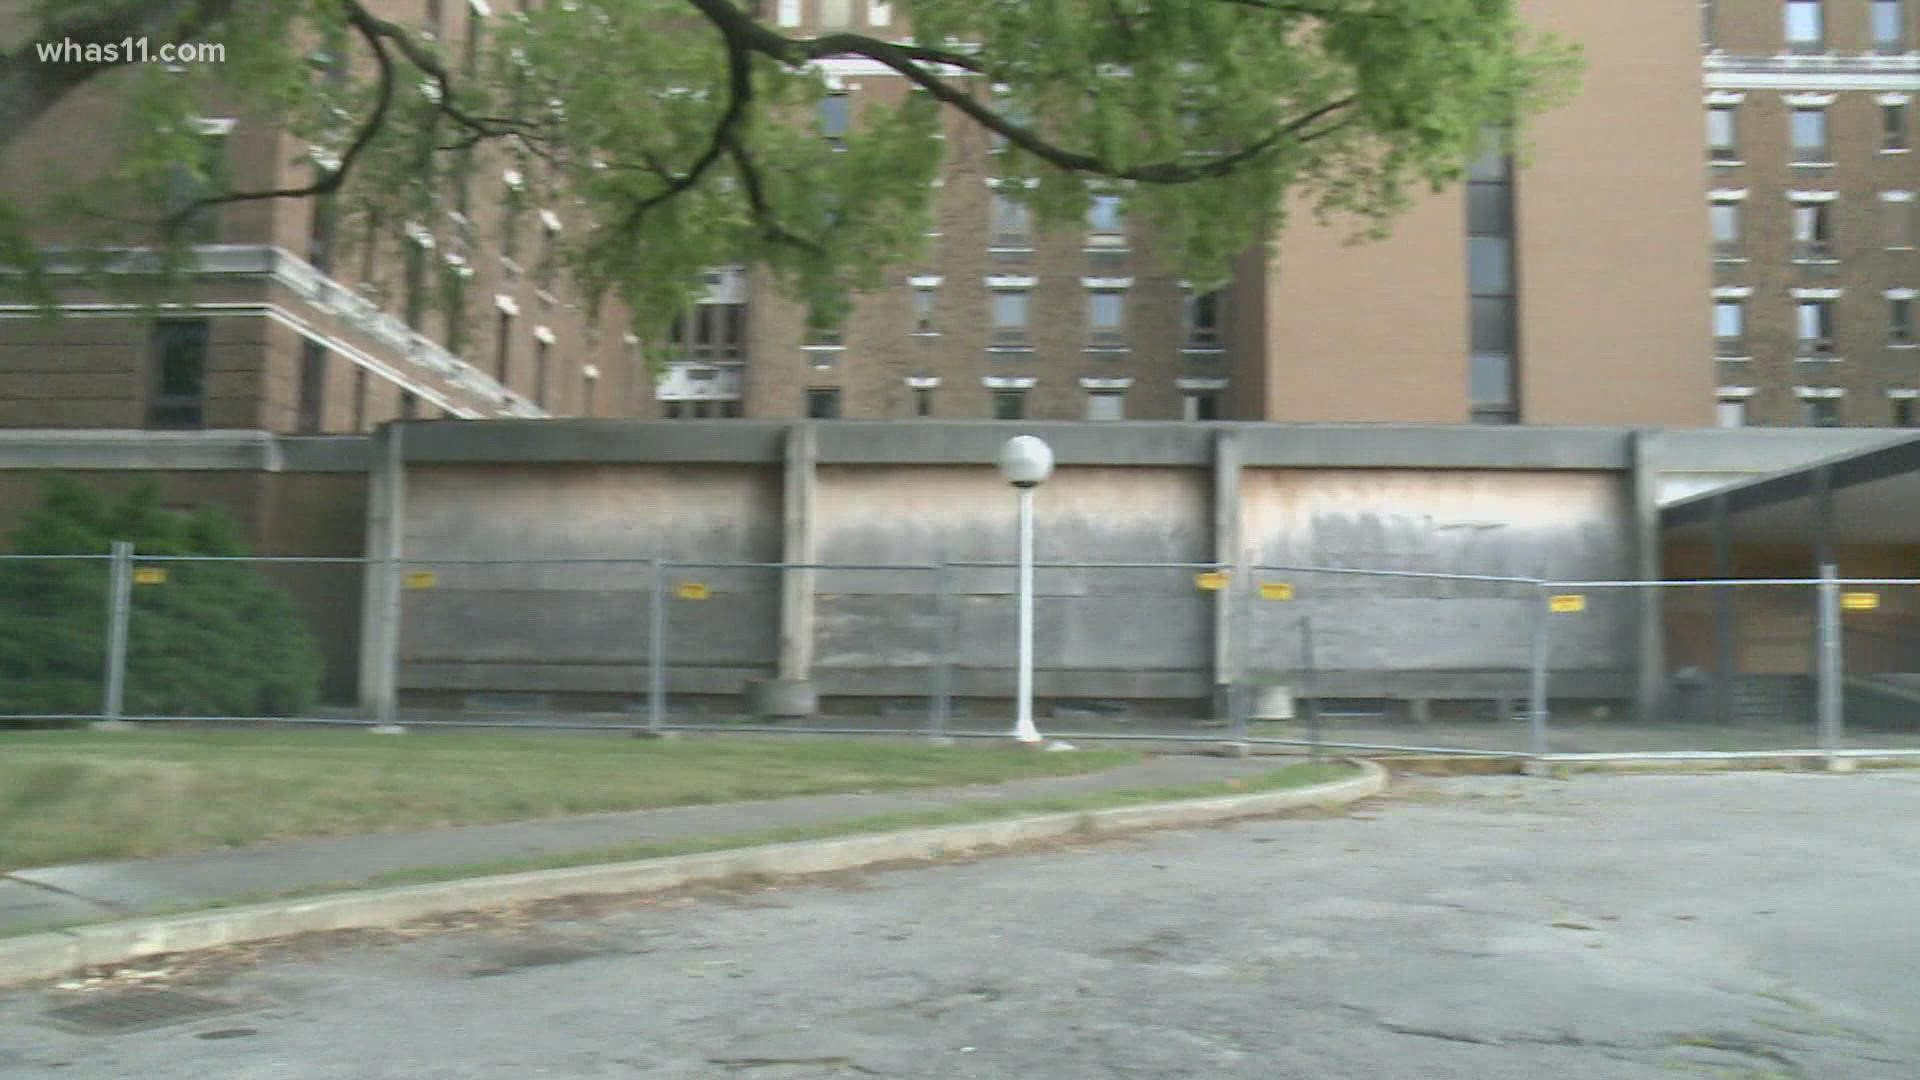 The project planned for Barrett Avenue has been stalled for months and officials say funding is the problem.